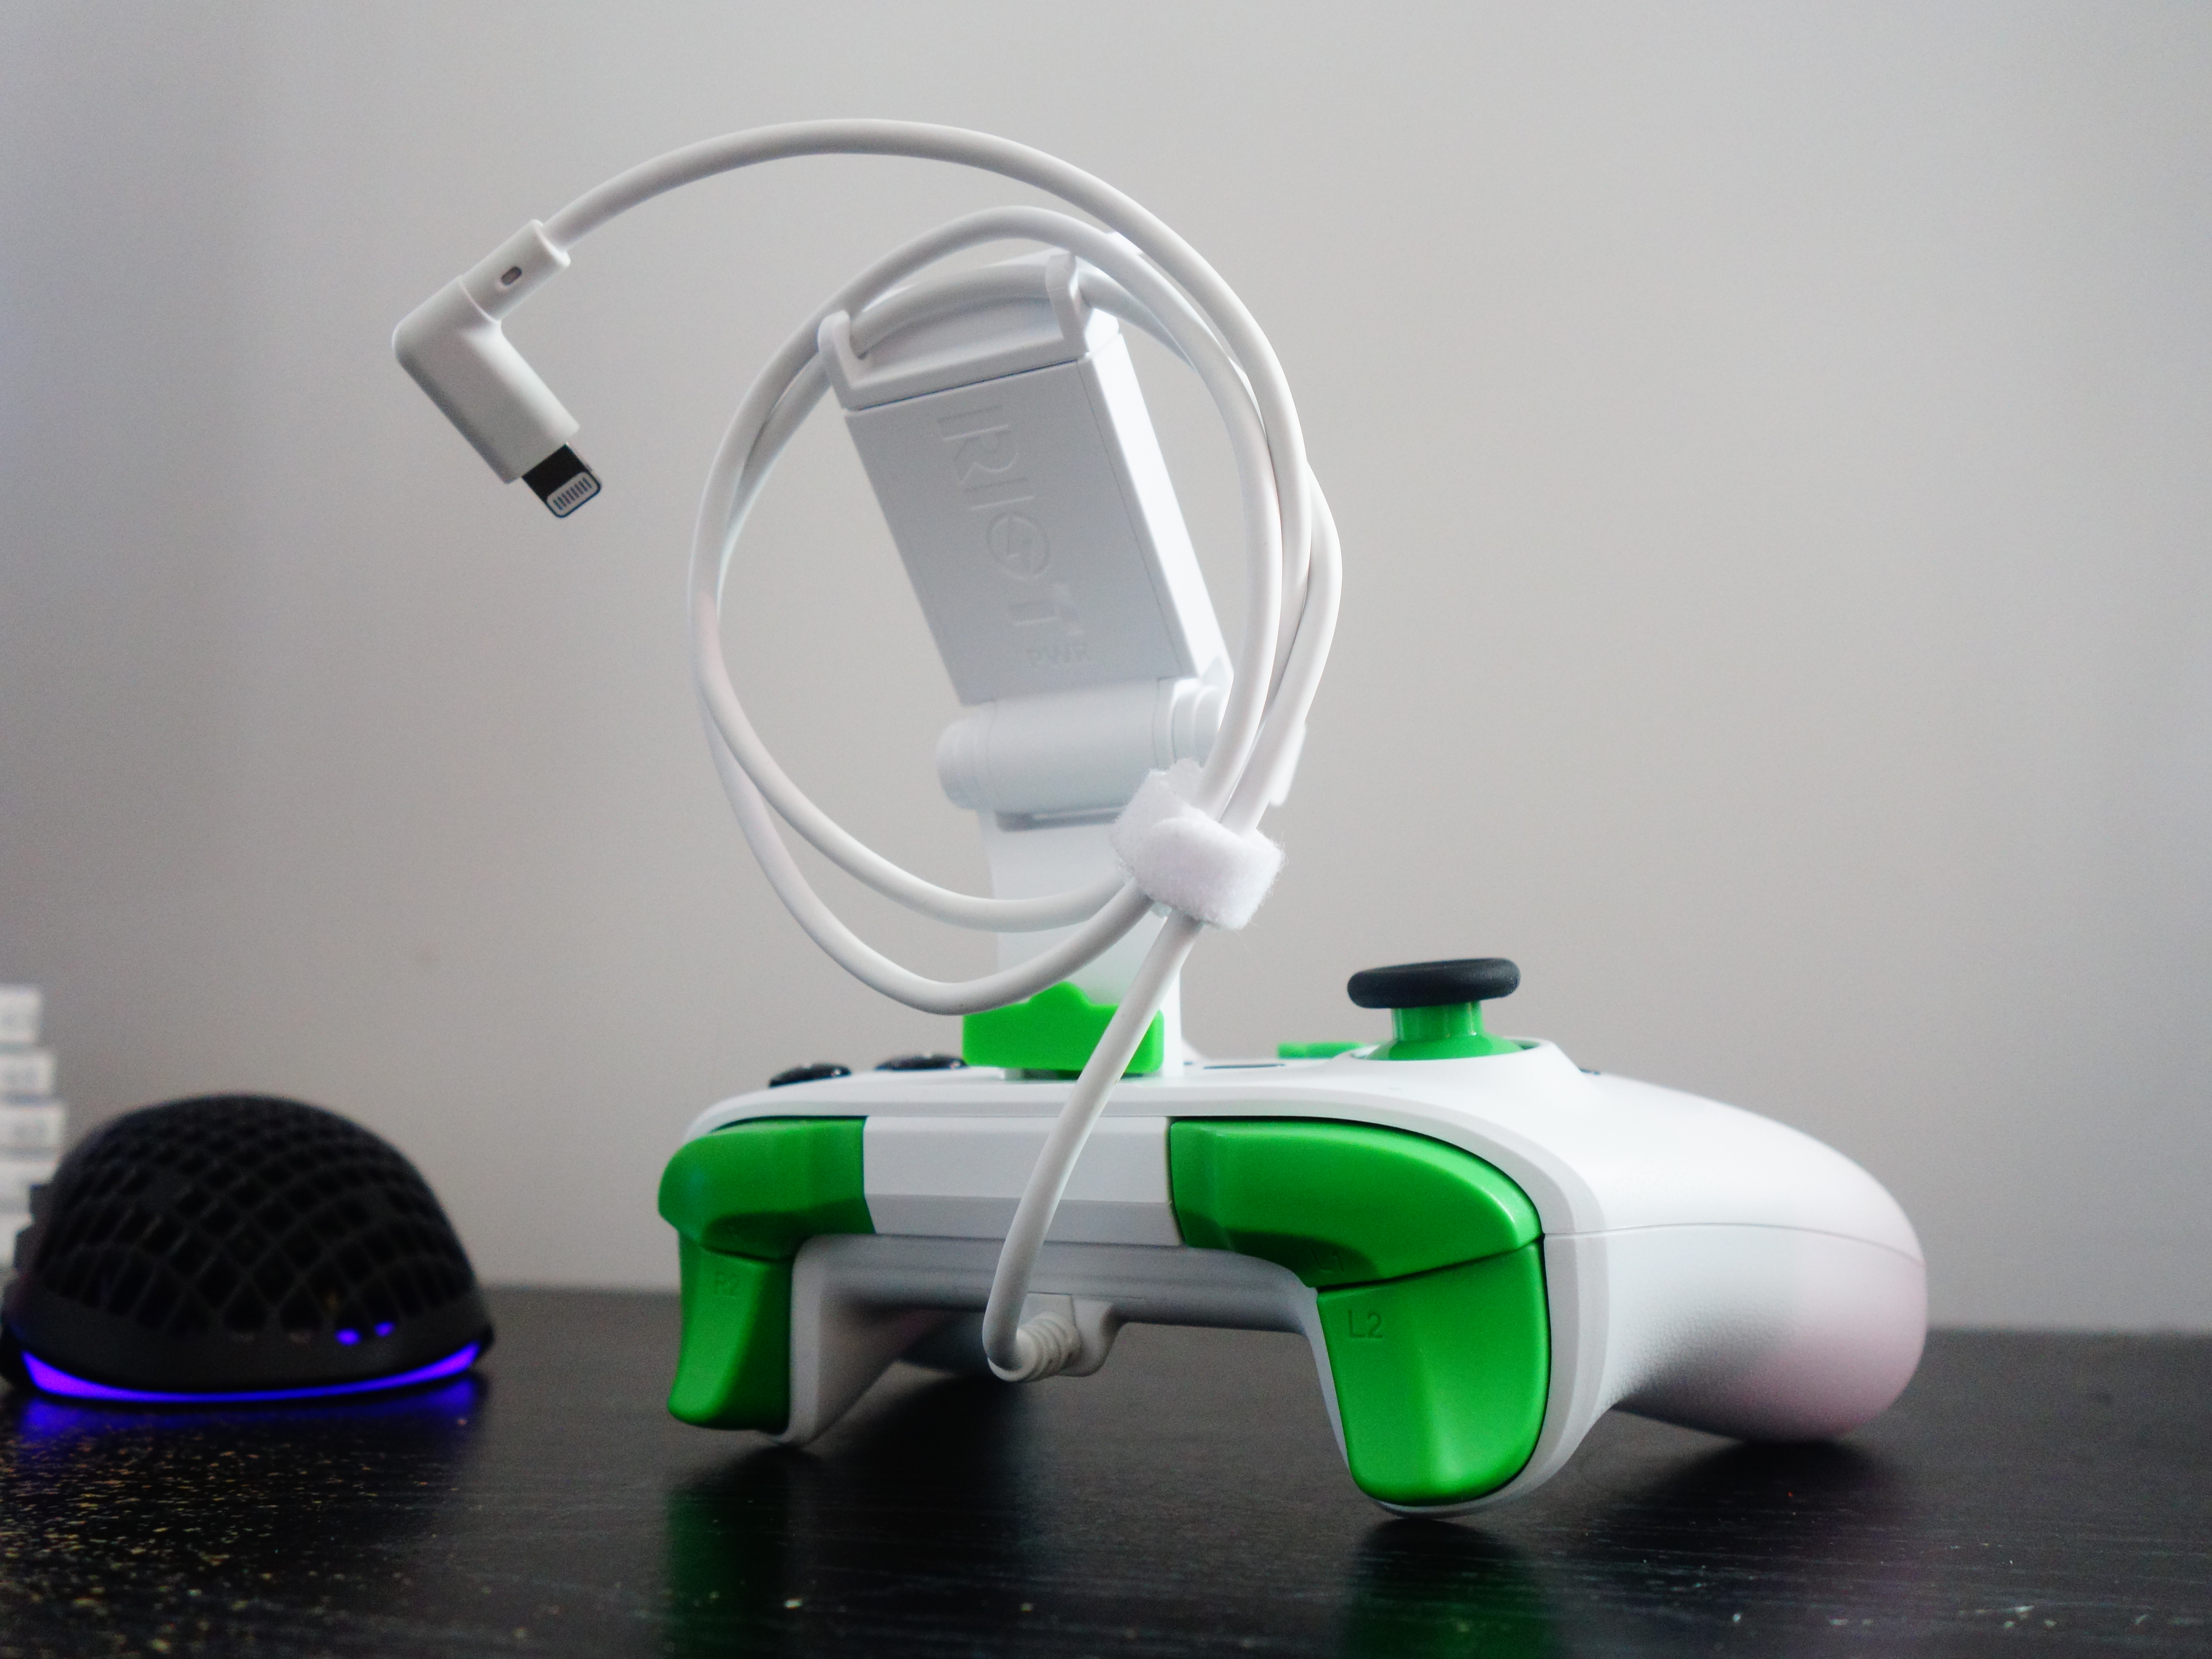 Xbox Cloud Gaming iPhone: RiotPWR Controller